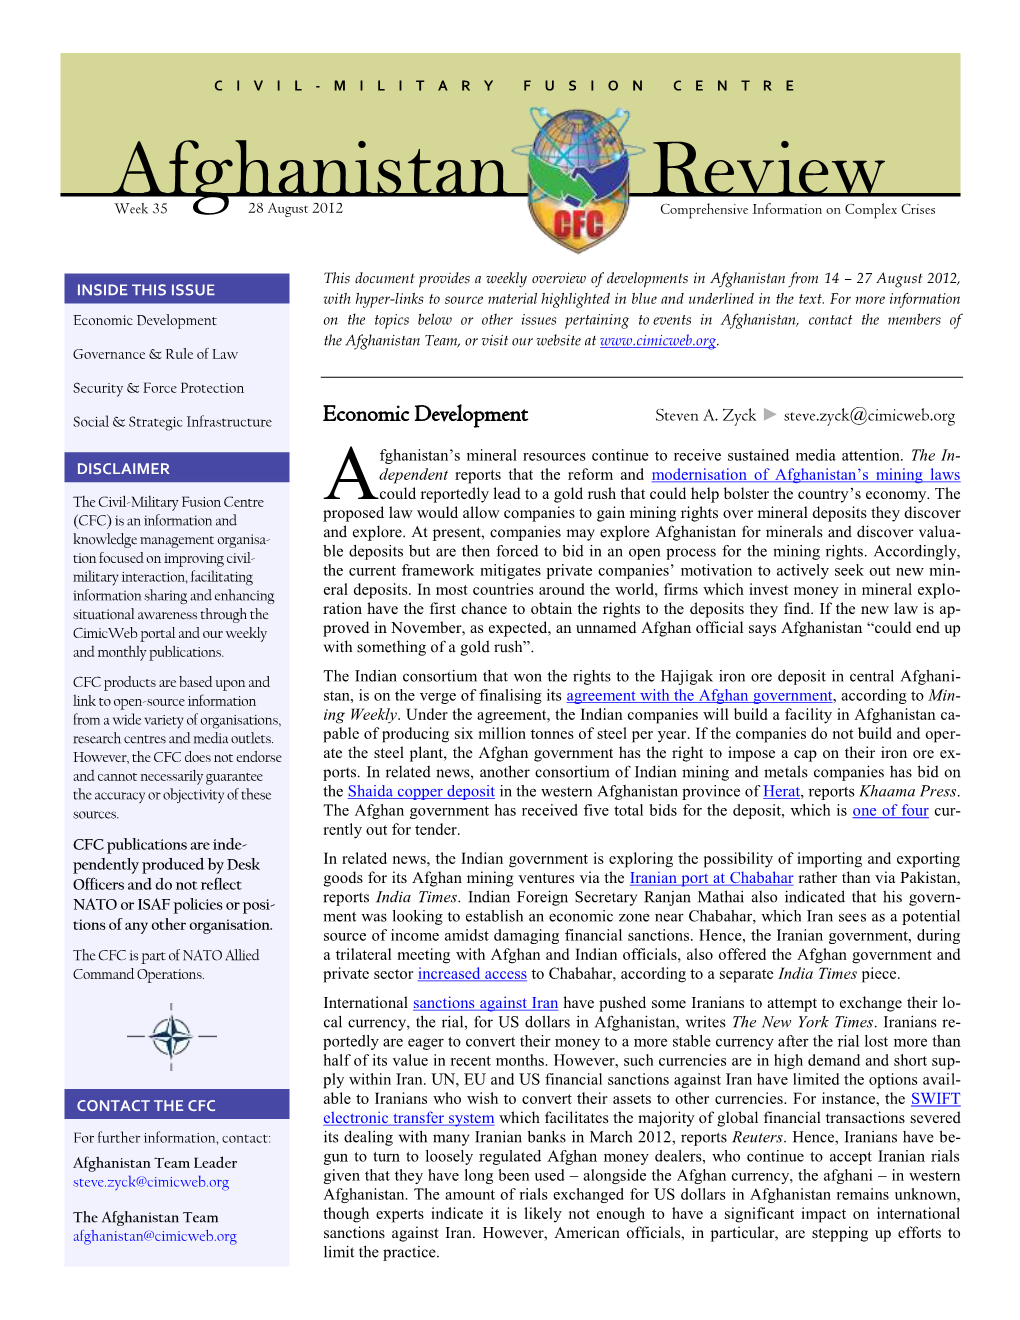 Afghanistan Review, 28 August 2012